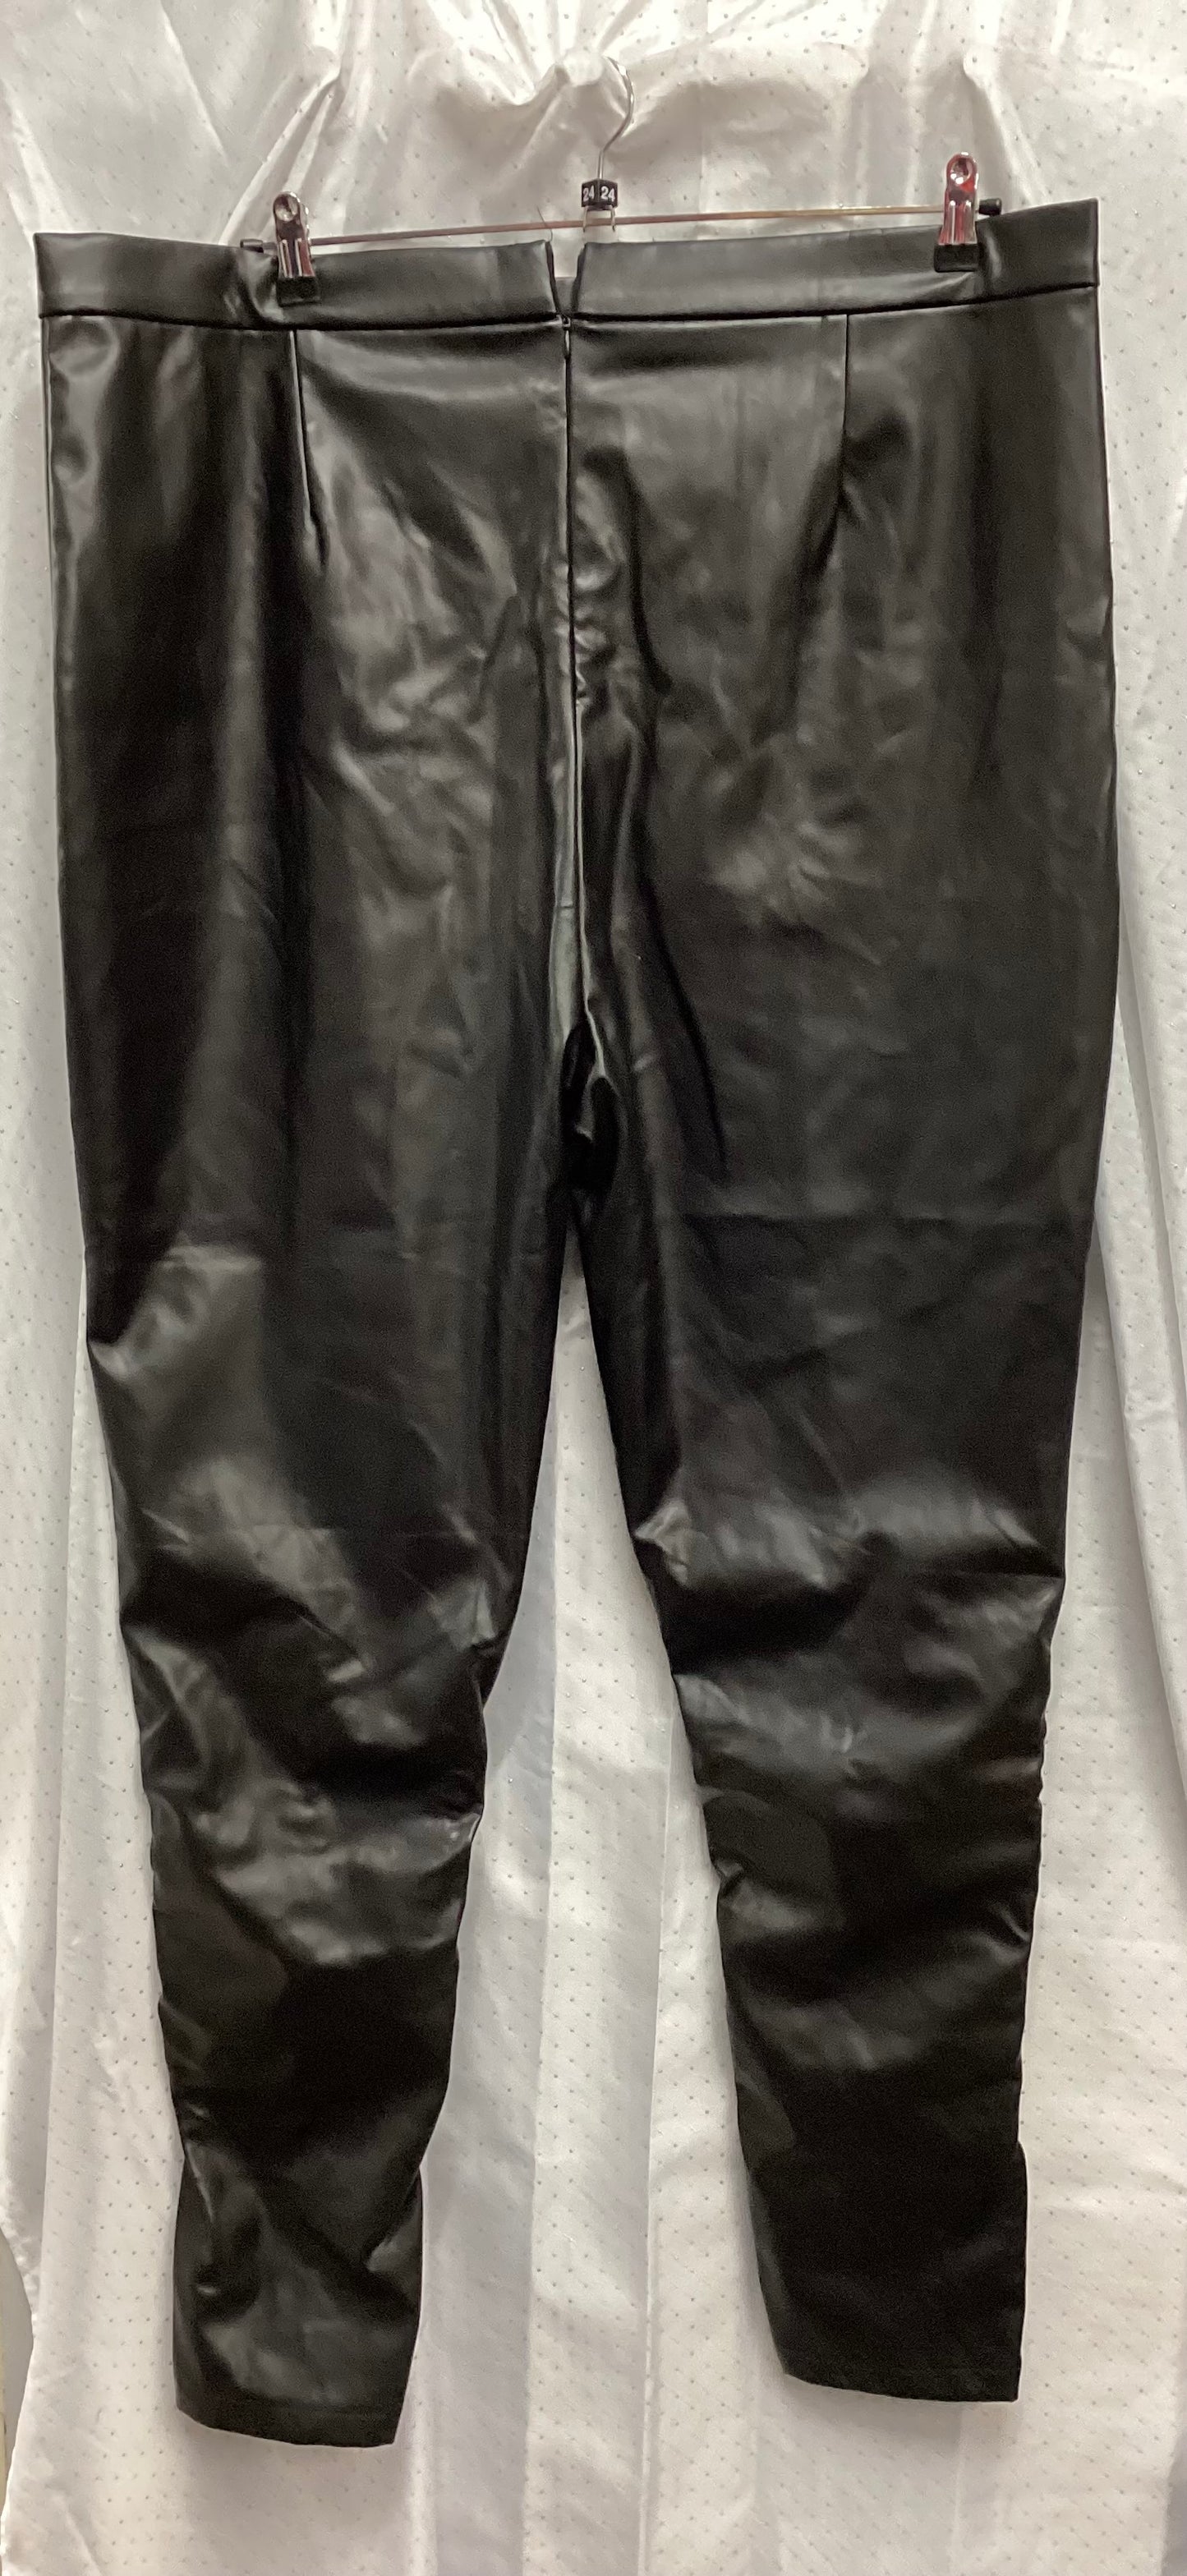 BNWT Boohoo Leather Look Size 24 Ruched Split Trousers